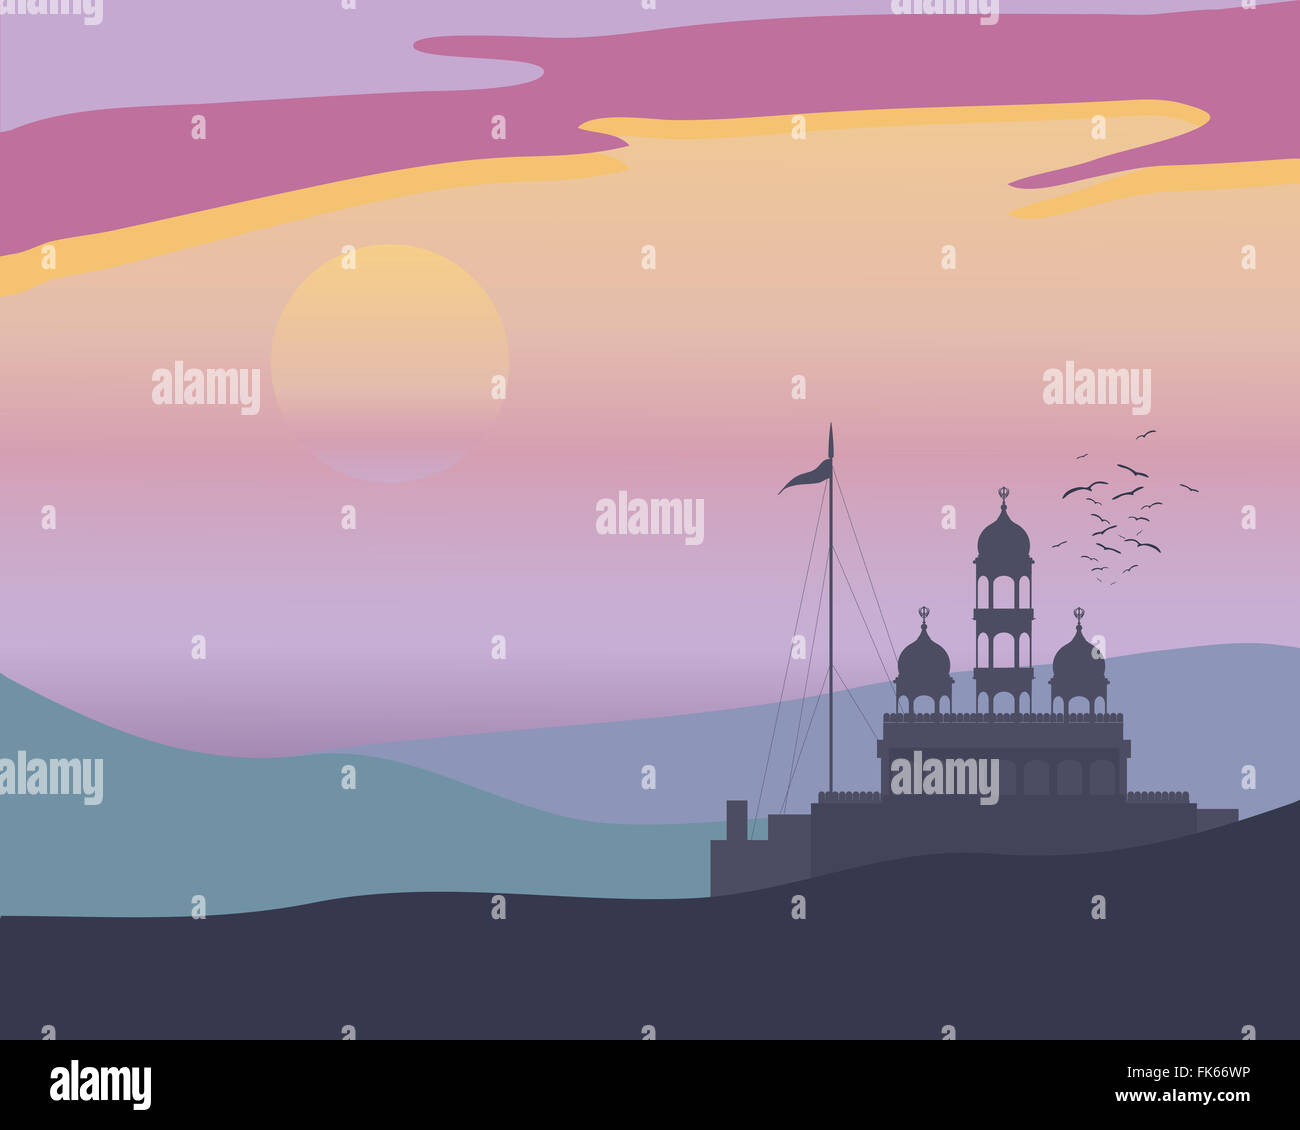 an illustration of a Punjabi landscape at evening prayers with gurdwara before a colorful sunset Stock Photo